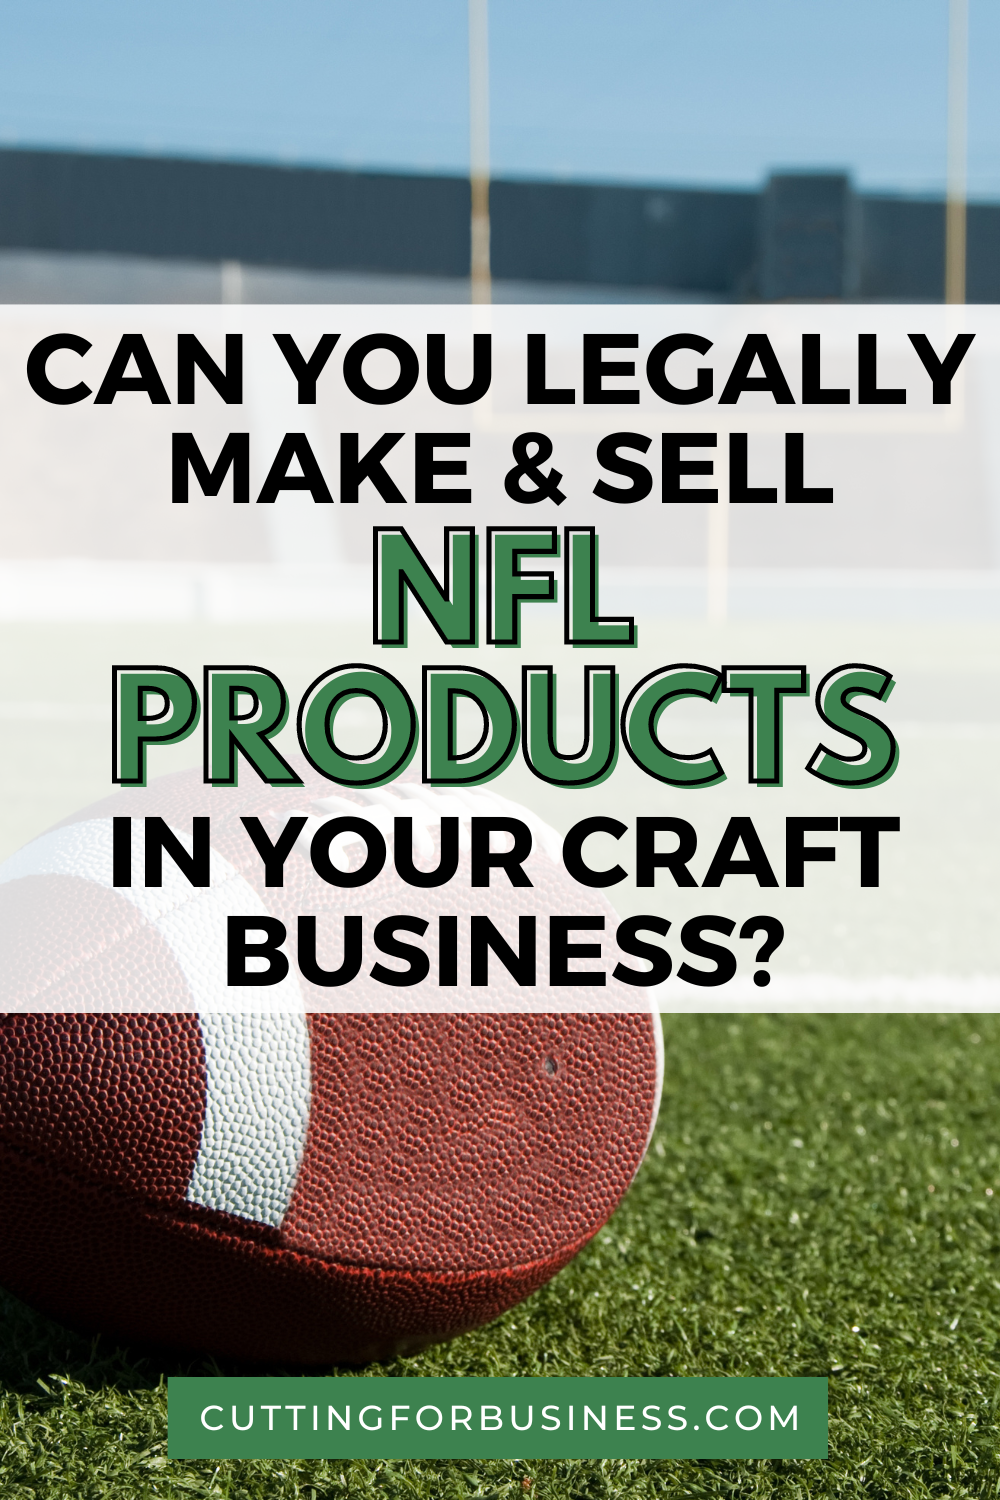 Trademarks: Can You Legally Make & Sell NFL Products in Your Craft Business? - cuttingforbusiness.com